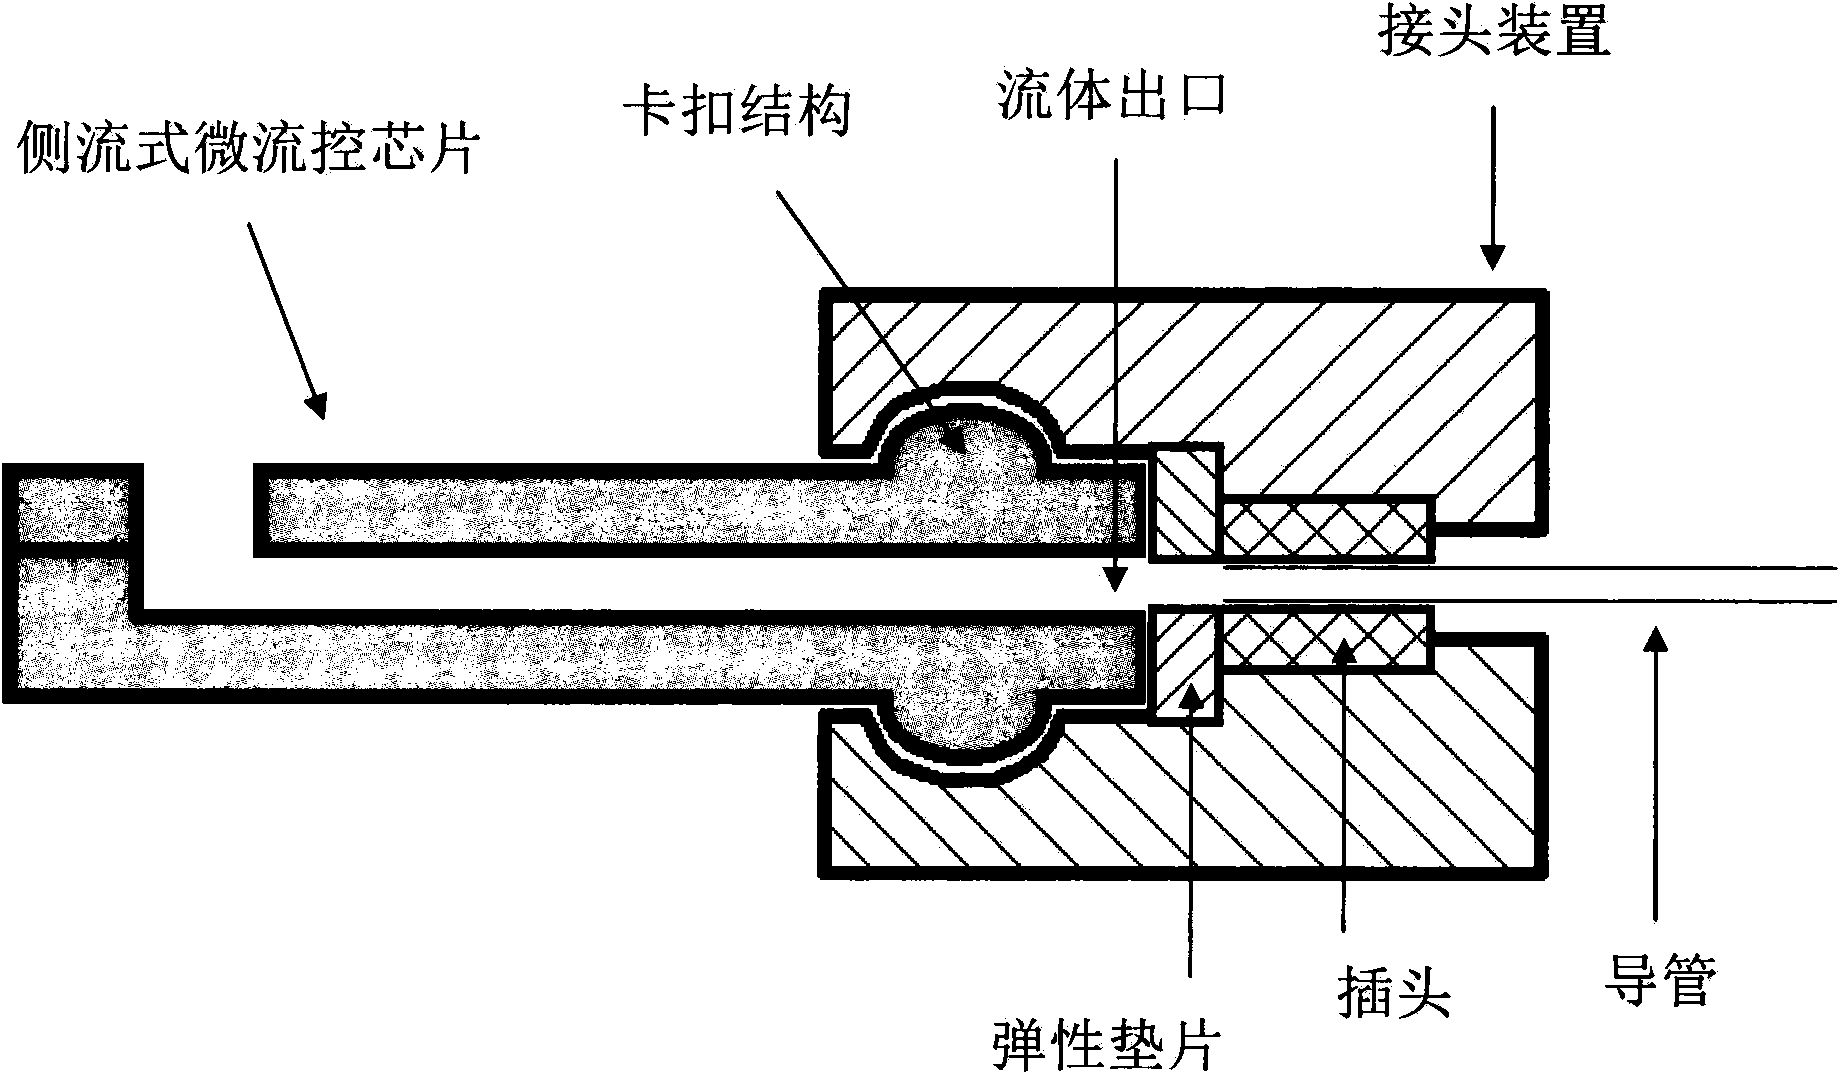 Lateral flow chip and its joint device